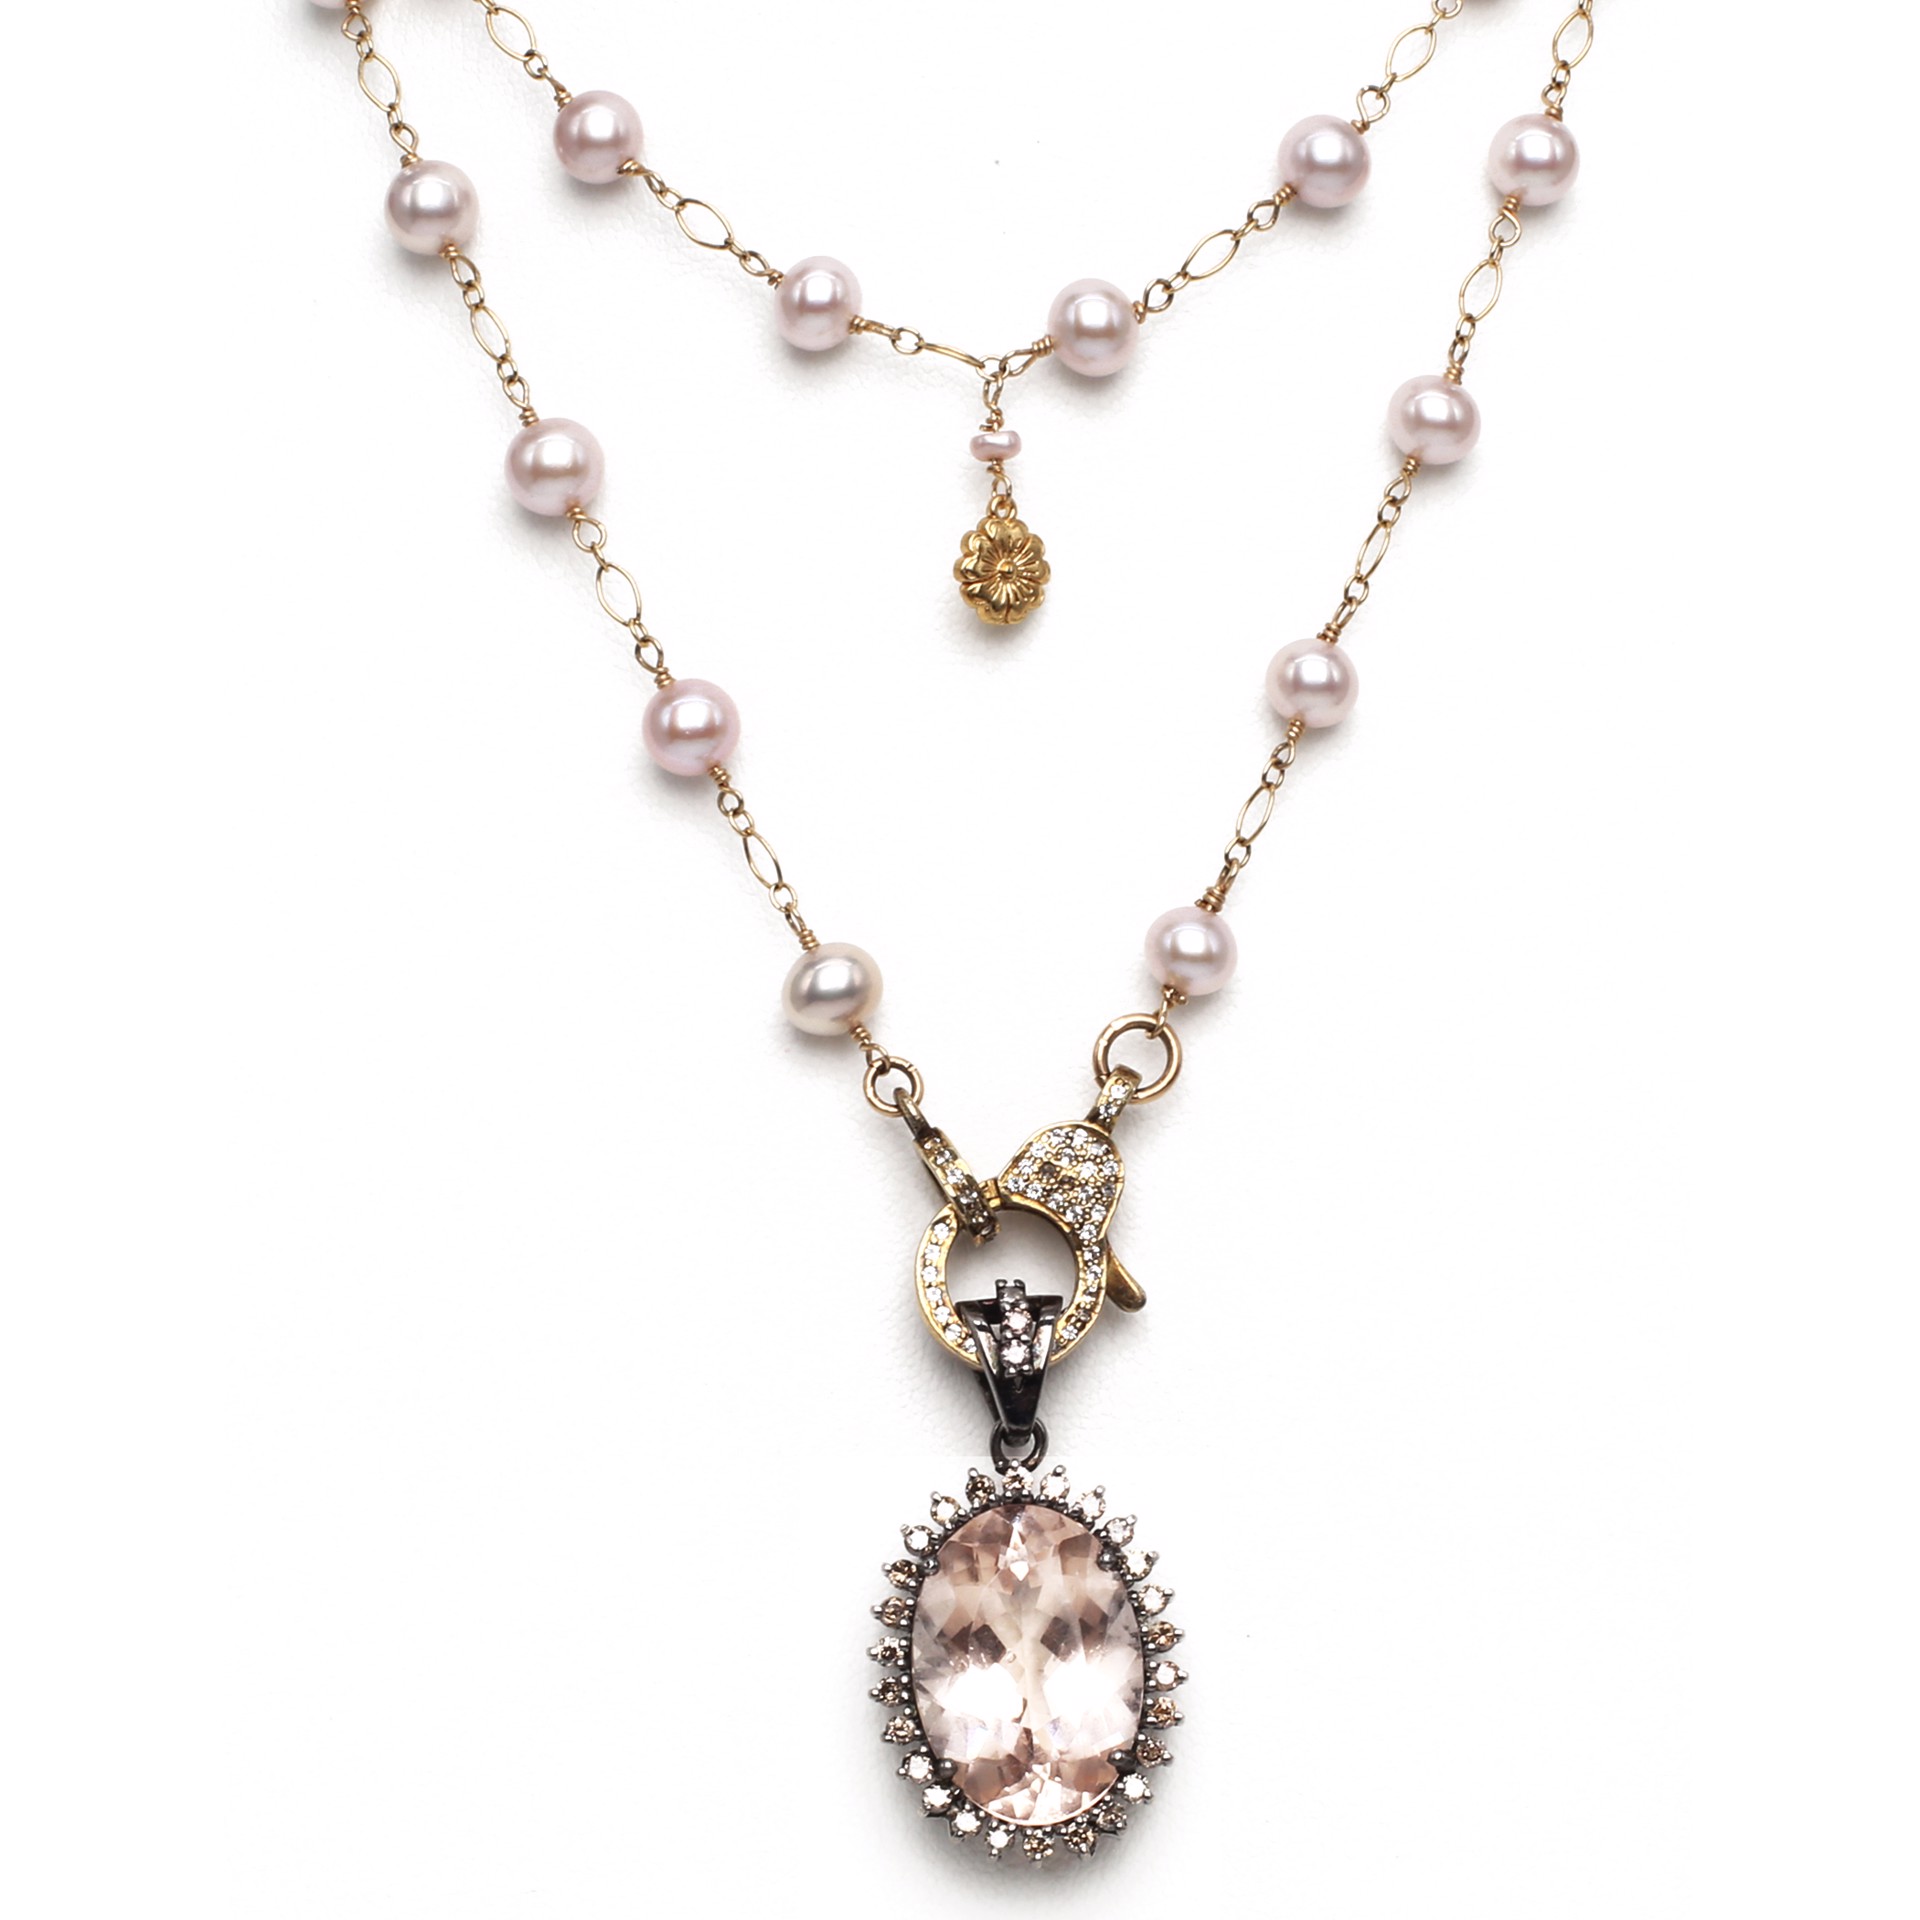 MLJ-3350-N- Large faceted morganite gemstone pendant surrounded by diamonds on a handmade chain of all natural color, slightly pink pearls with a pave diamond lobster clasp. by Melinda Lawton Jewelry